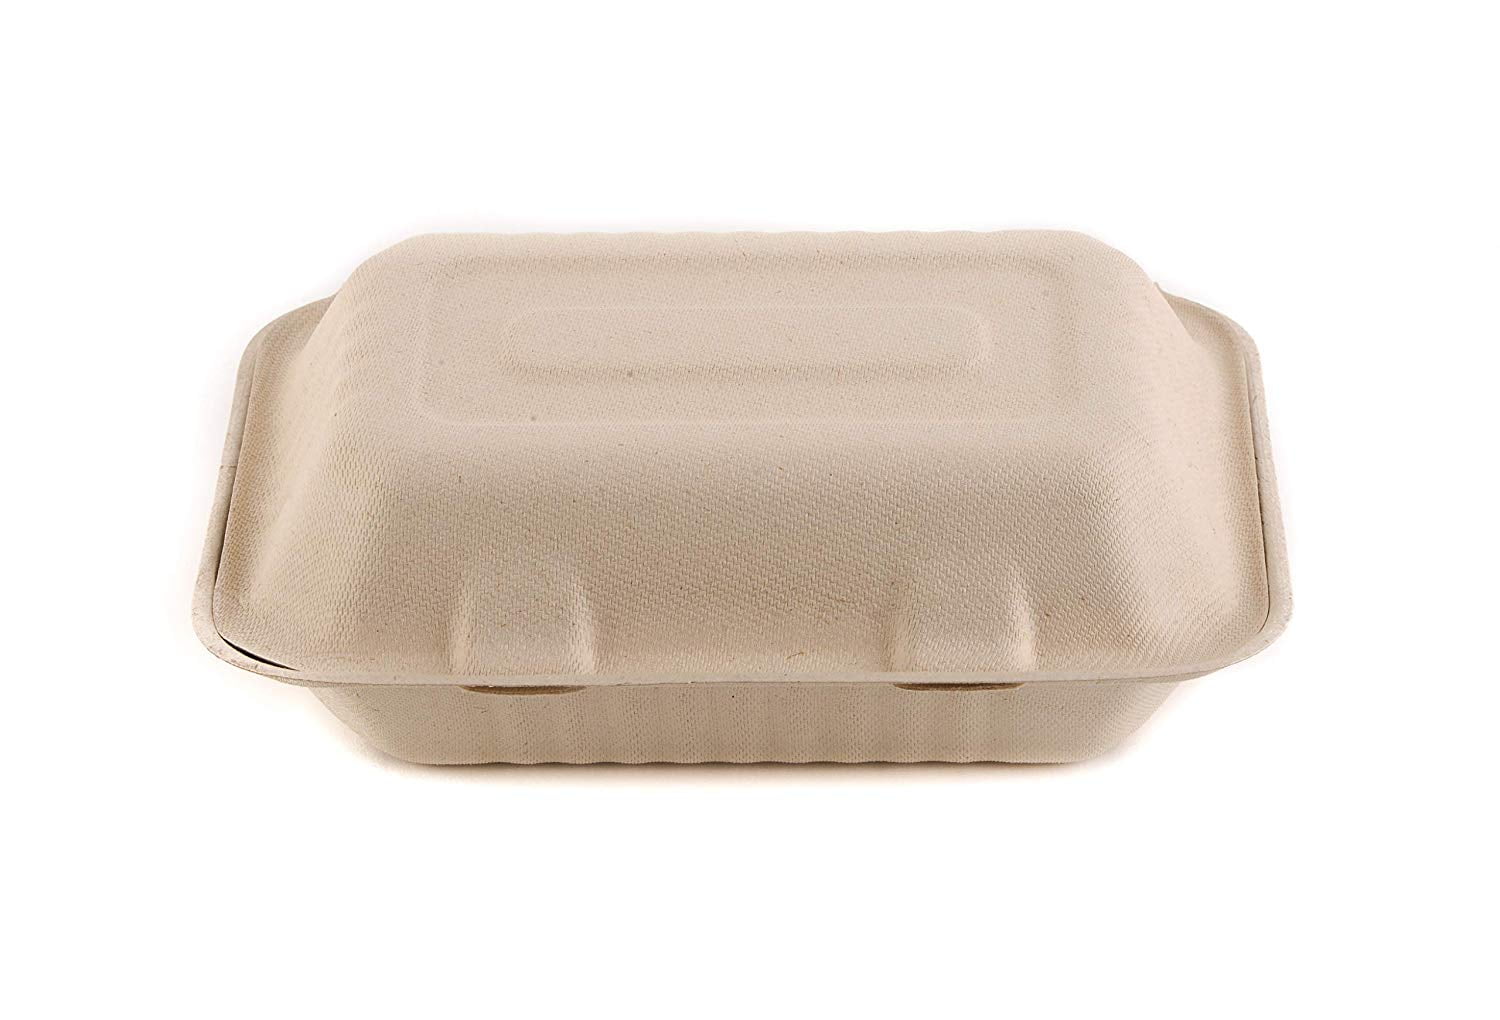 Solo HC9CSC2050 Bare Eco-Forward Bagasse Hinged Lid Takeout Containers, 3  Compartment, 9.6 x 9.4 x 3.2, Ivory - 200 / Case